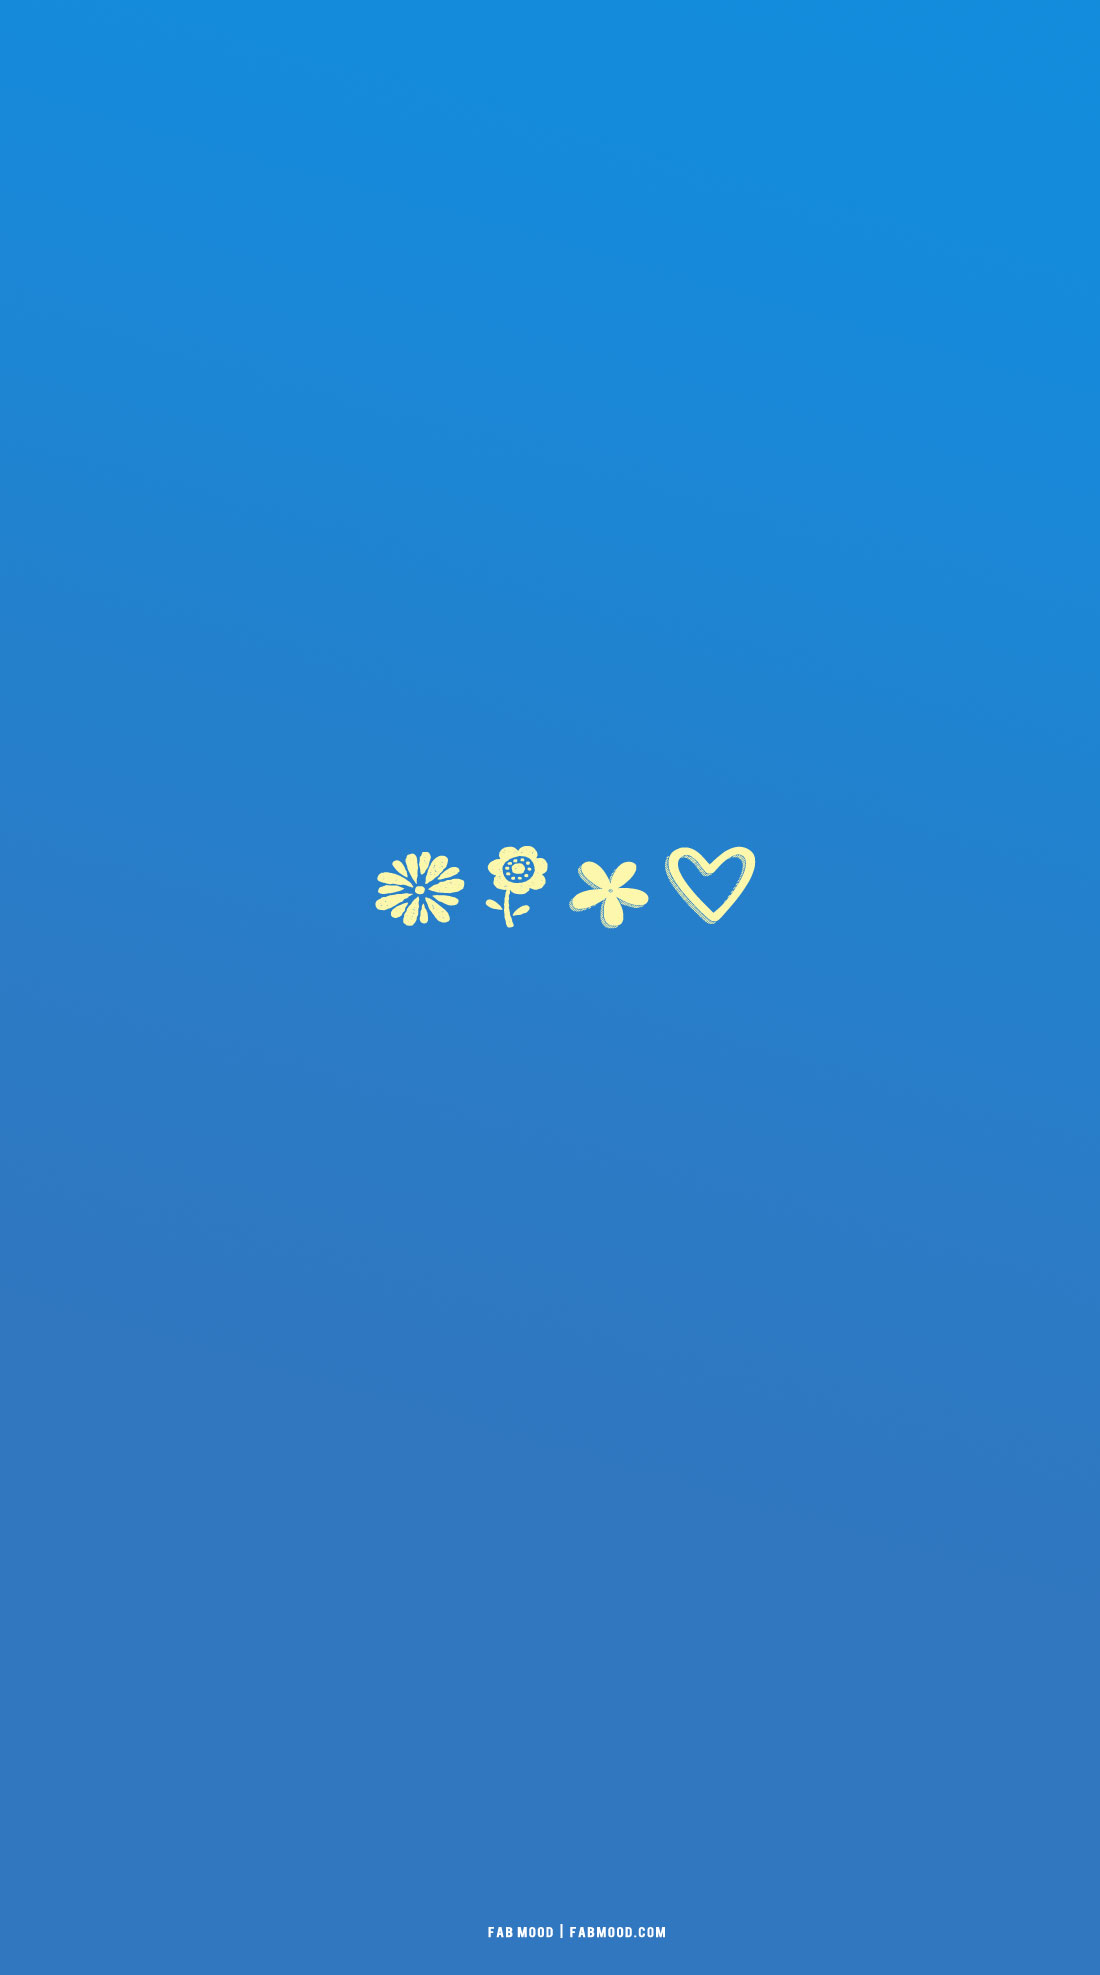 15 Azure Blue Wallpapers For Phone : Pastel Yellow Flower & Heart